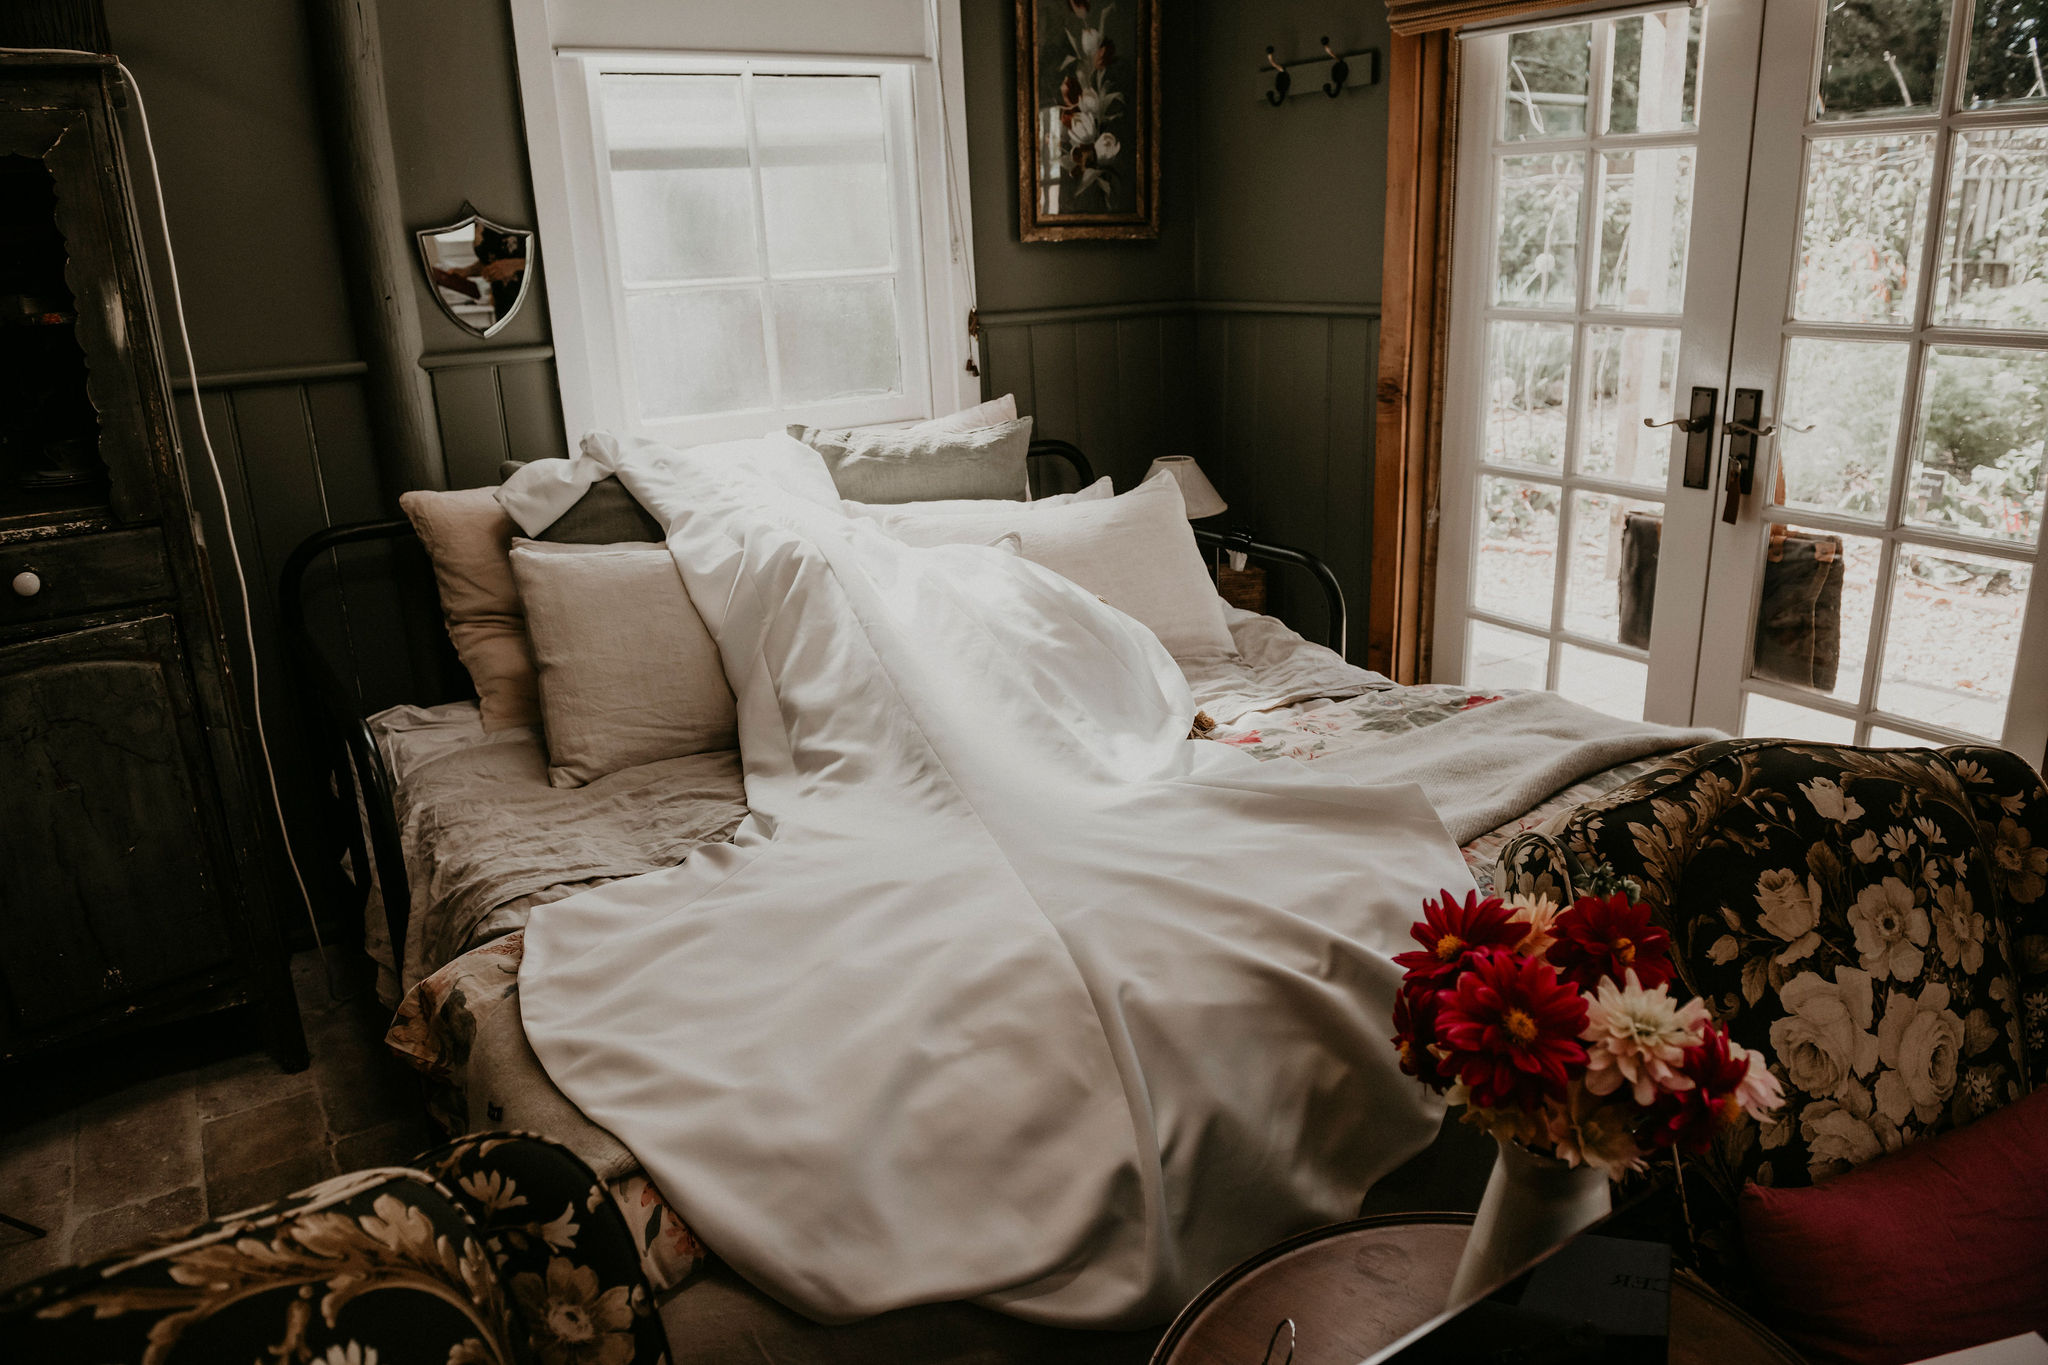 Wedding dress draped over bed in potters cottage while bride is getting ready before the ceremony Let's Elope Melbourne Portfolio Celebrant Photographer Elopement Packages Victoria Sarah Matler Photography intimate weddings Acre of Roses Trentham romantic ceremony